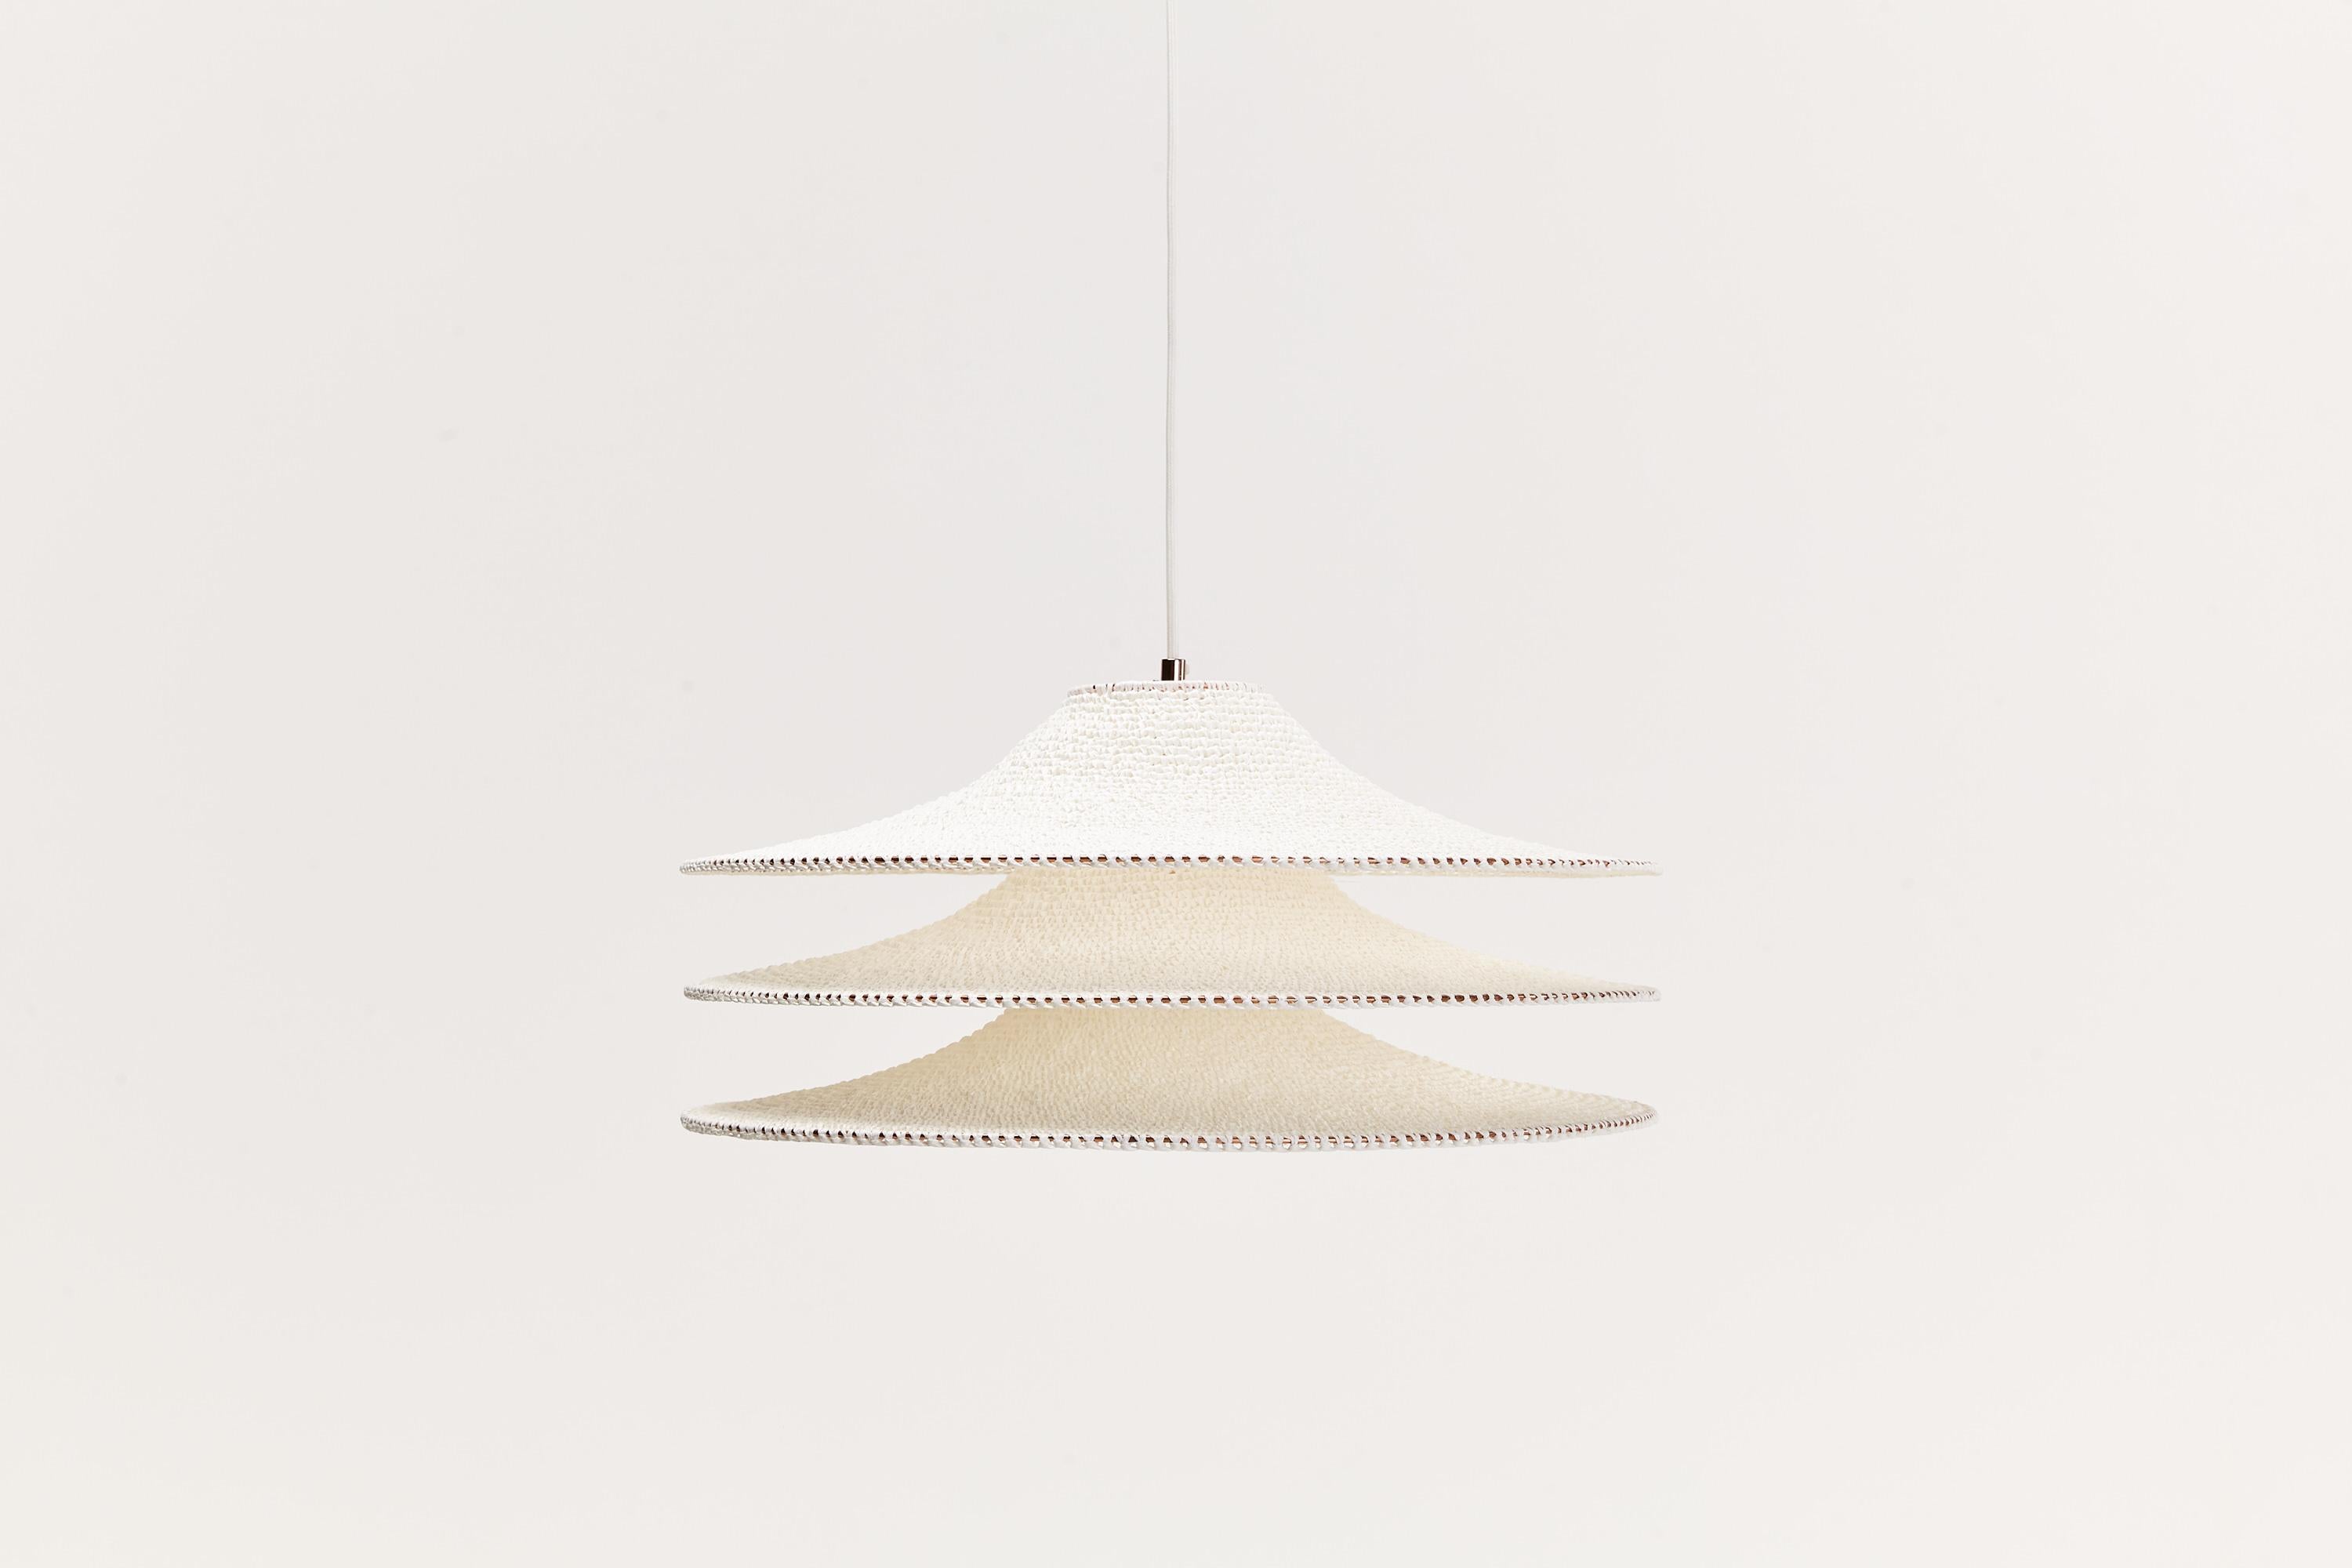 Small simple shade 03 bamboo pendant lamp by Naomi Paul
Dimensions: D 50 x H 22 cm
Materials: Metal frame, Japanese bamboo paper yarn.
Available in other colors and in 4 sizes: D 30, D 50, D 60, D 80 cm.
Available in plain, 50/50, trim, ombré or